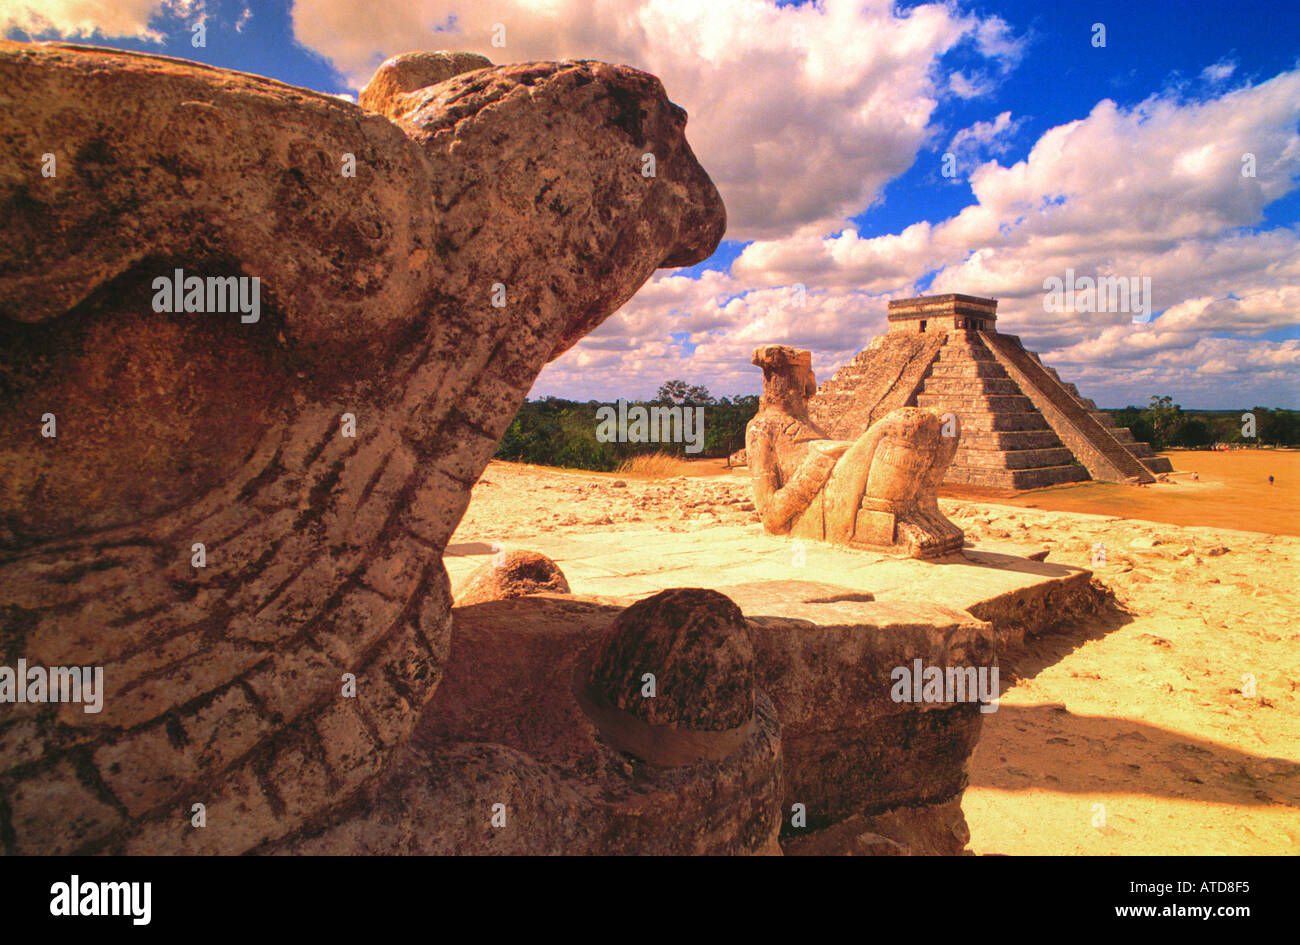 Statues of gods and reptiles sit upon the ruins of Chichen Itza with a view of El Castillo or the Pyramid in the distance Stock Photo